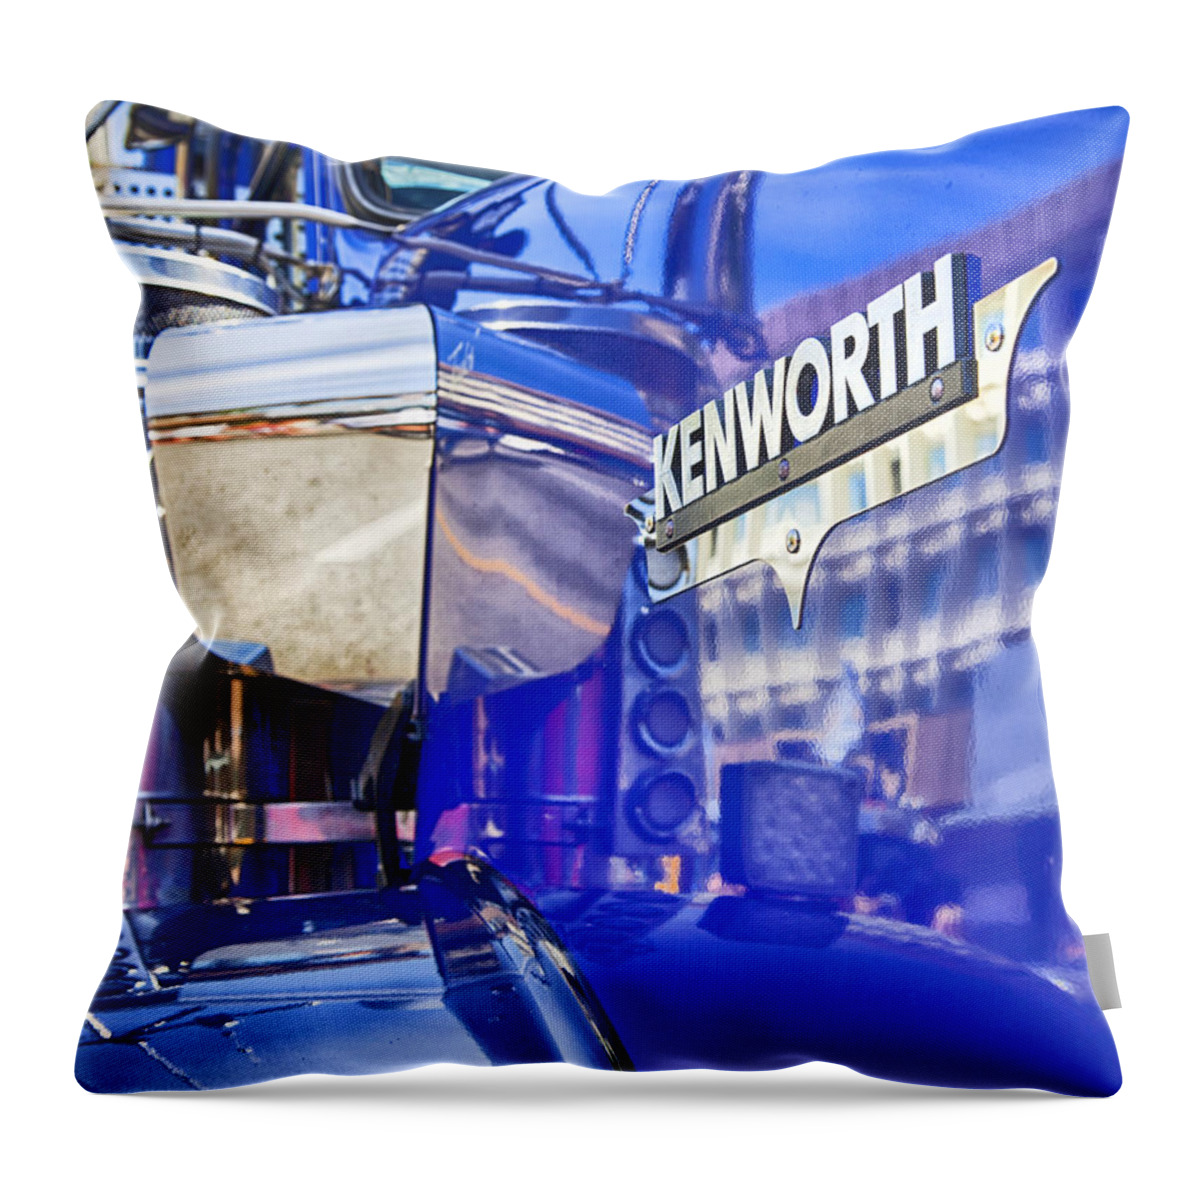 Kenworth Throw Pillow featuring the photograph Reflecting On A Kenworth by Theresa Tahara